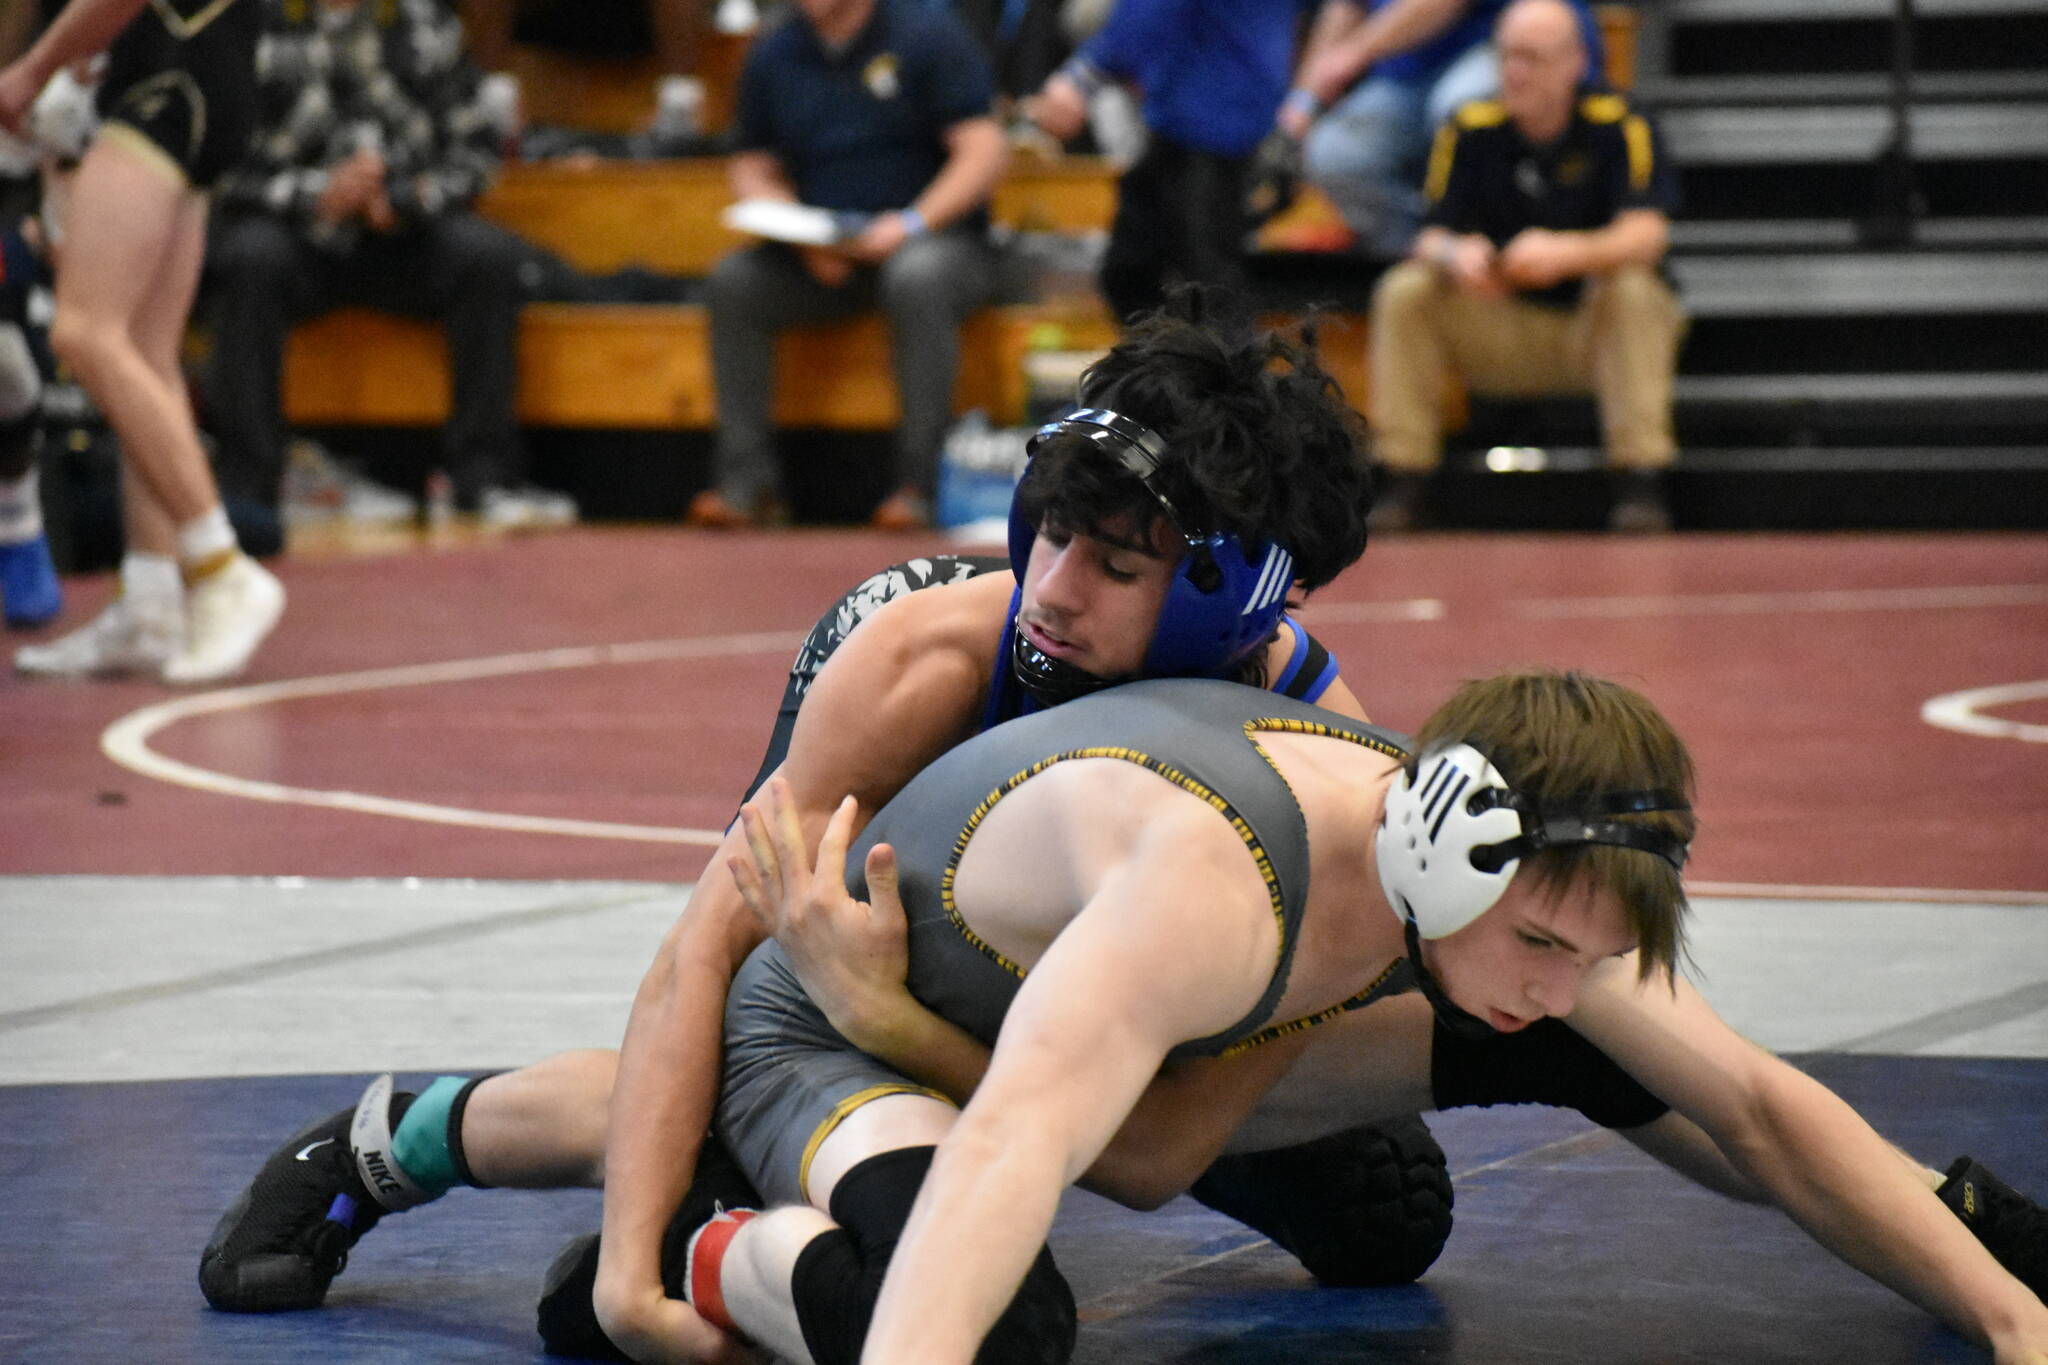 Kent-Meridian wrestler works in his opening match of the day at Todd Beamer. Ben Ray / The Reporter